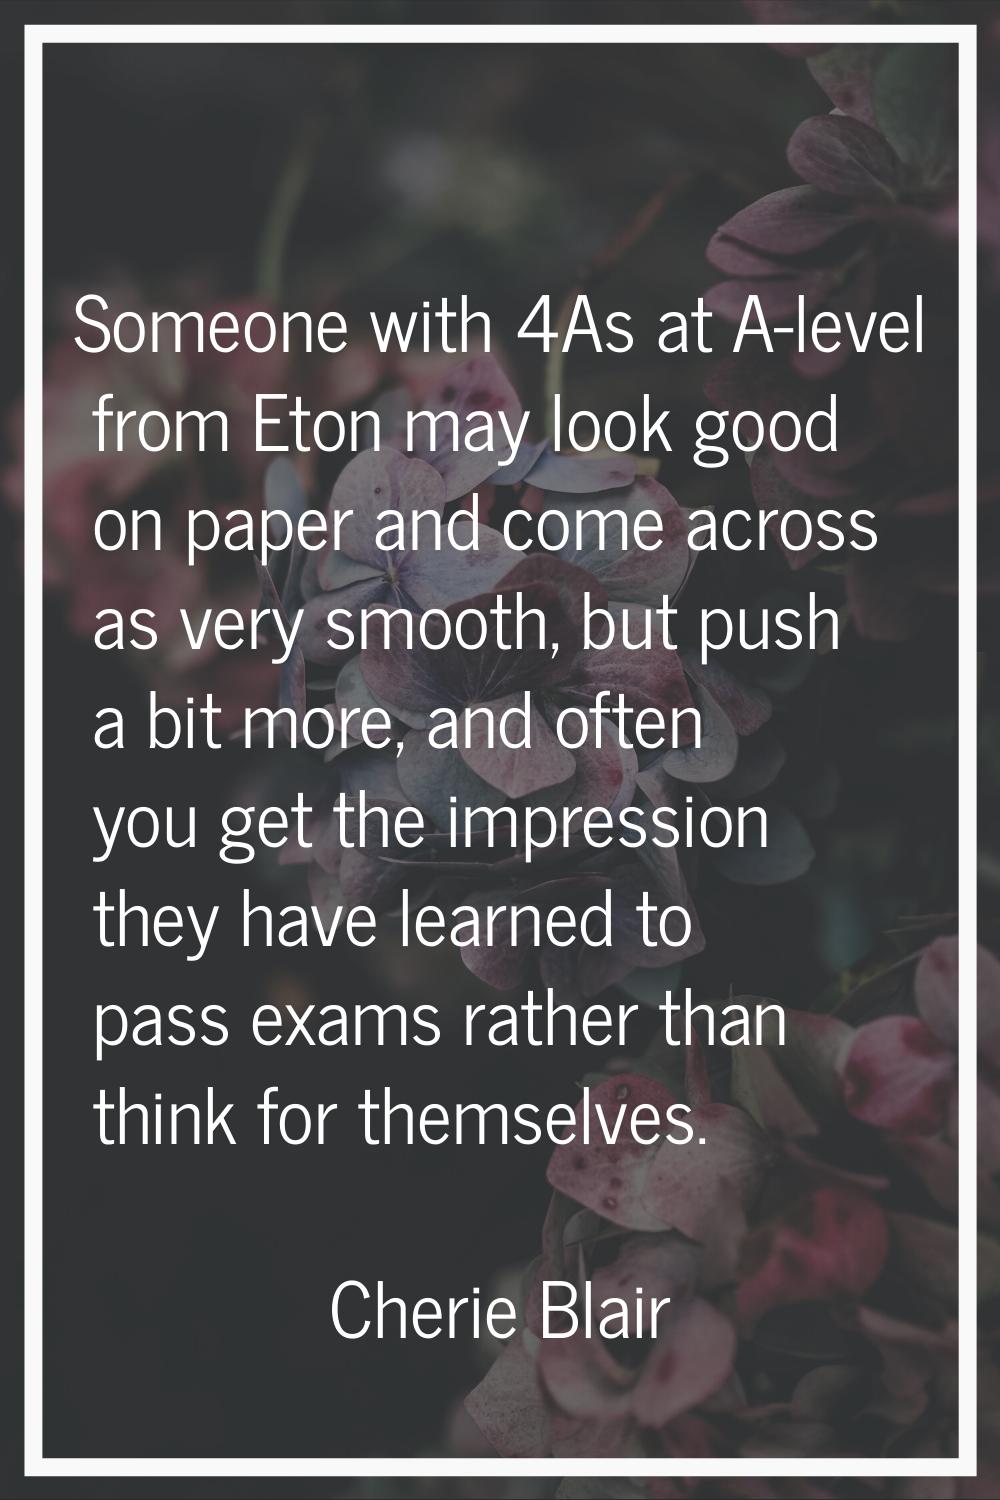 Someone with 4As at A-level from Eton may look good on paper and come across as very smooth, but pu